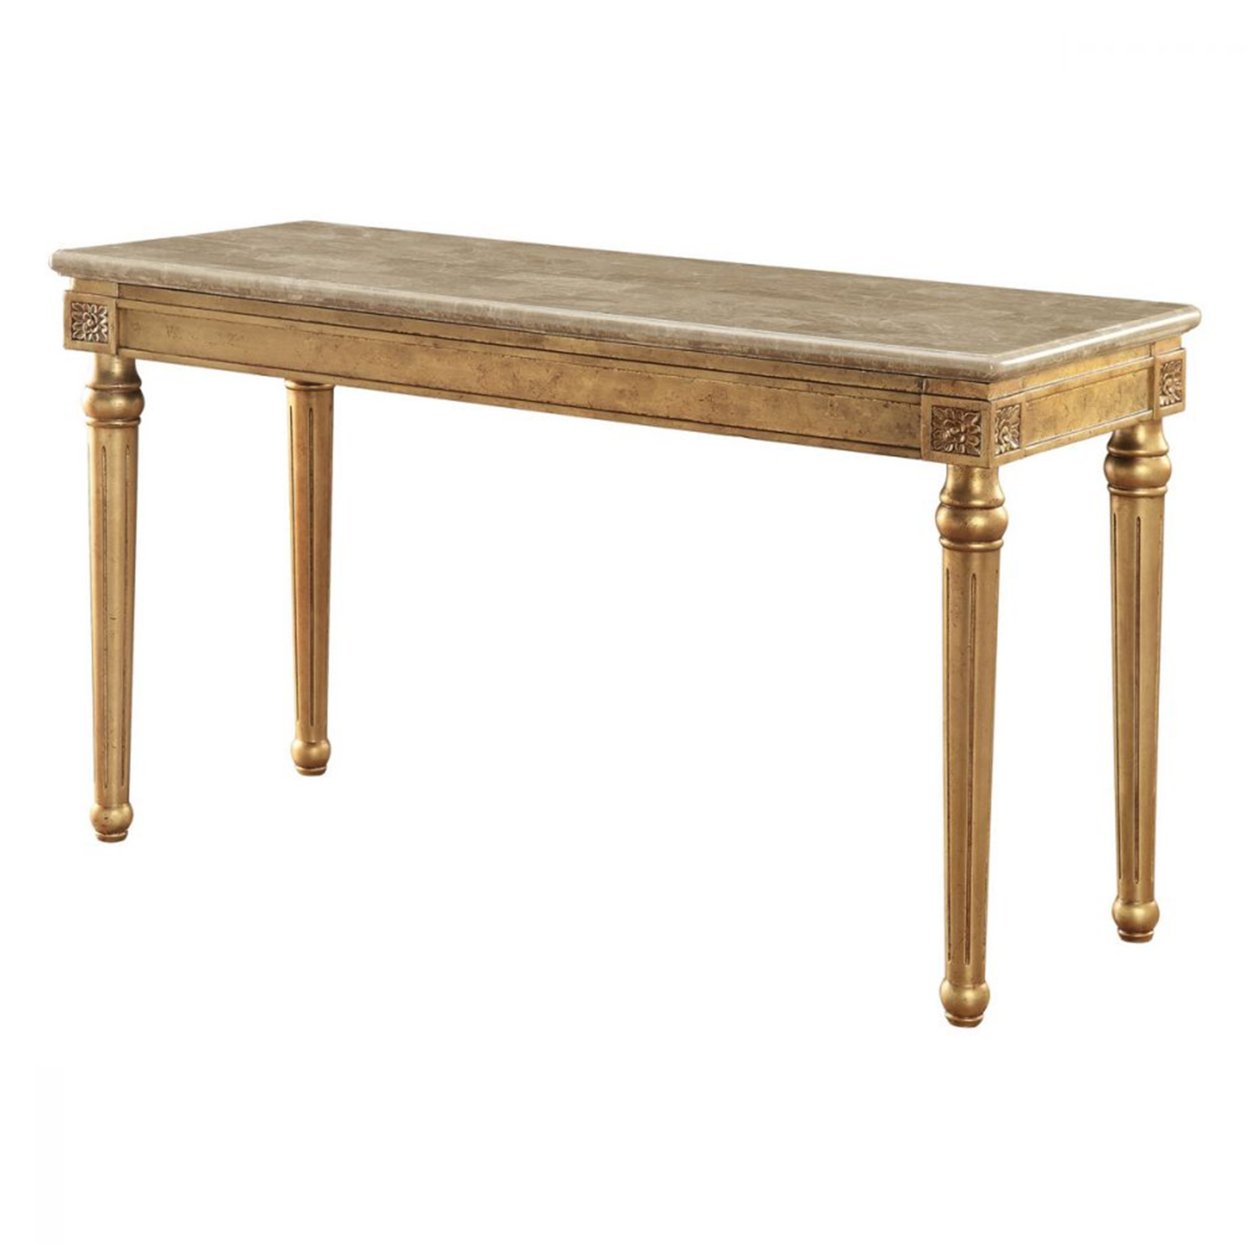 Marble Top Sofa Table With Fluted Detail Wooden Turned Legs, Gold- Saltoro Sherpi